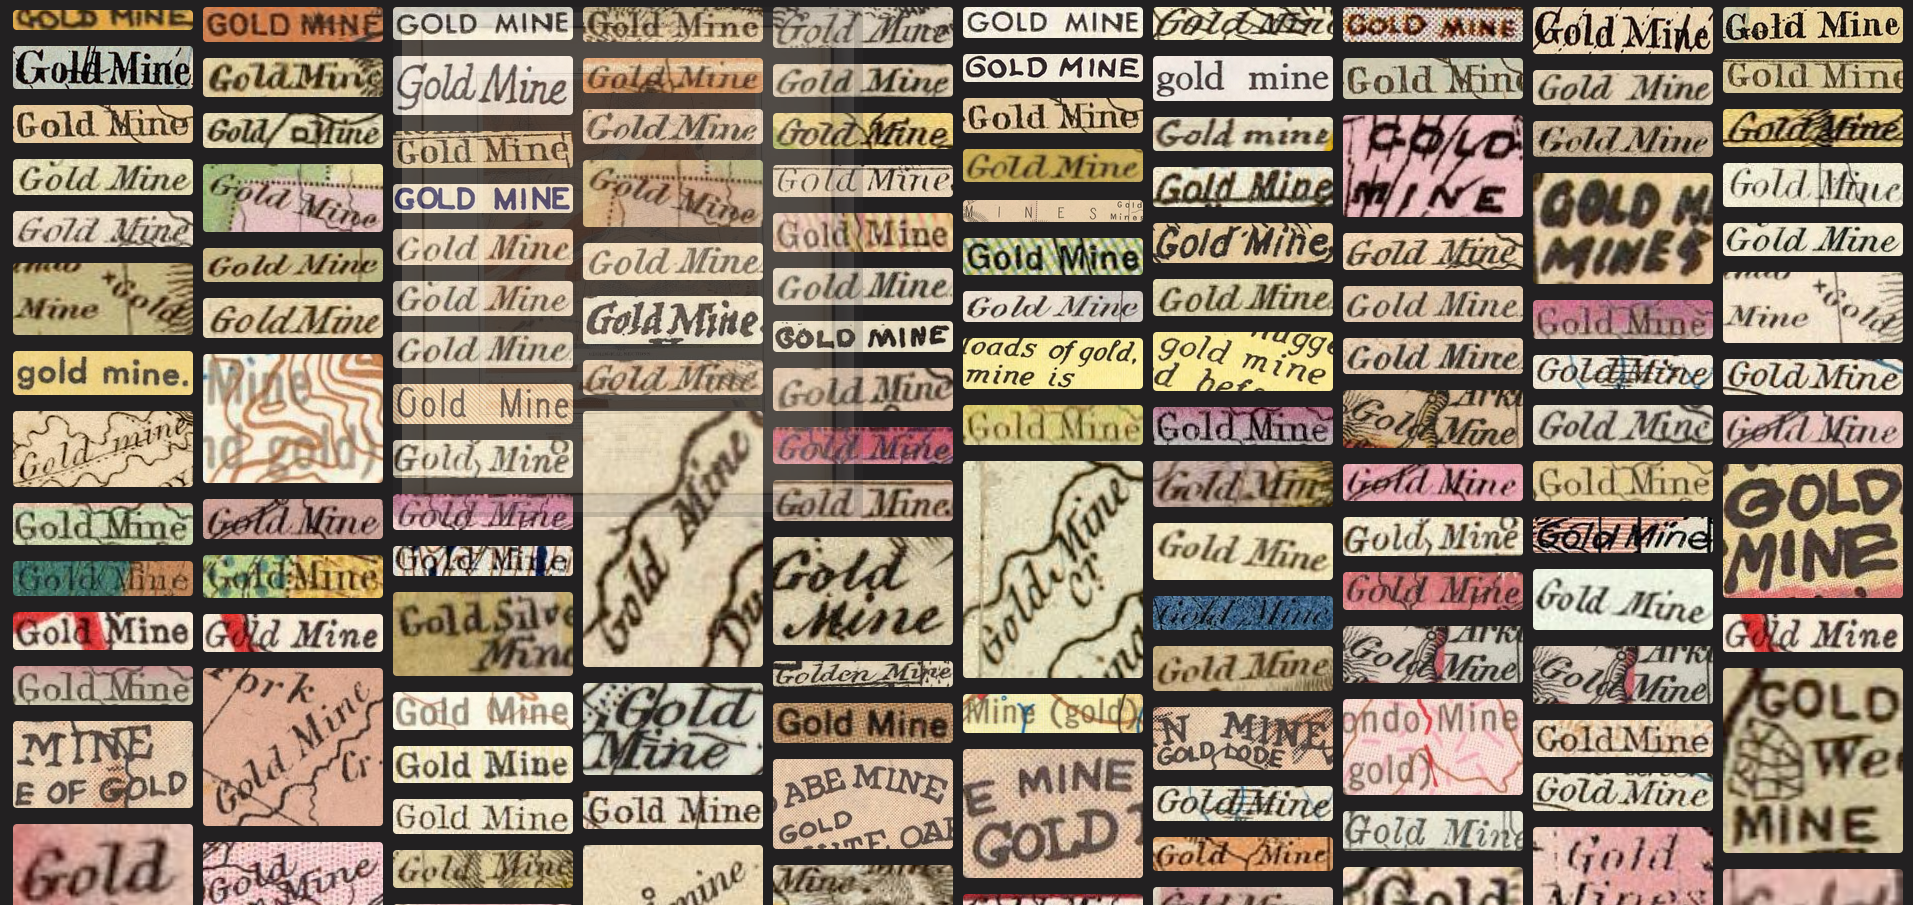 The mozaic of labels. Source: David Rumsey Map Collection